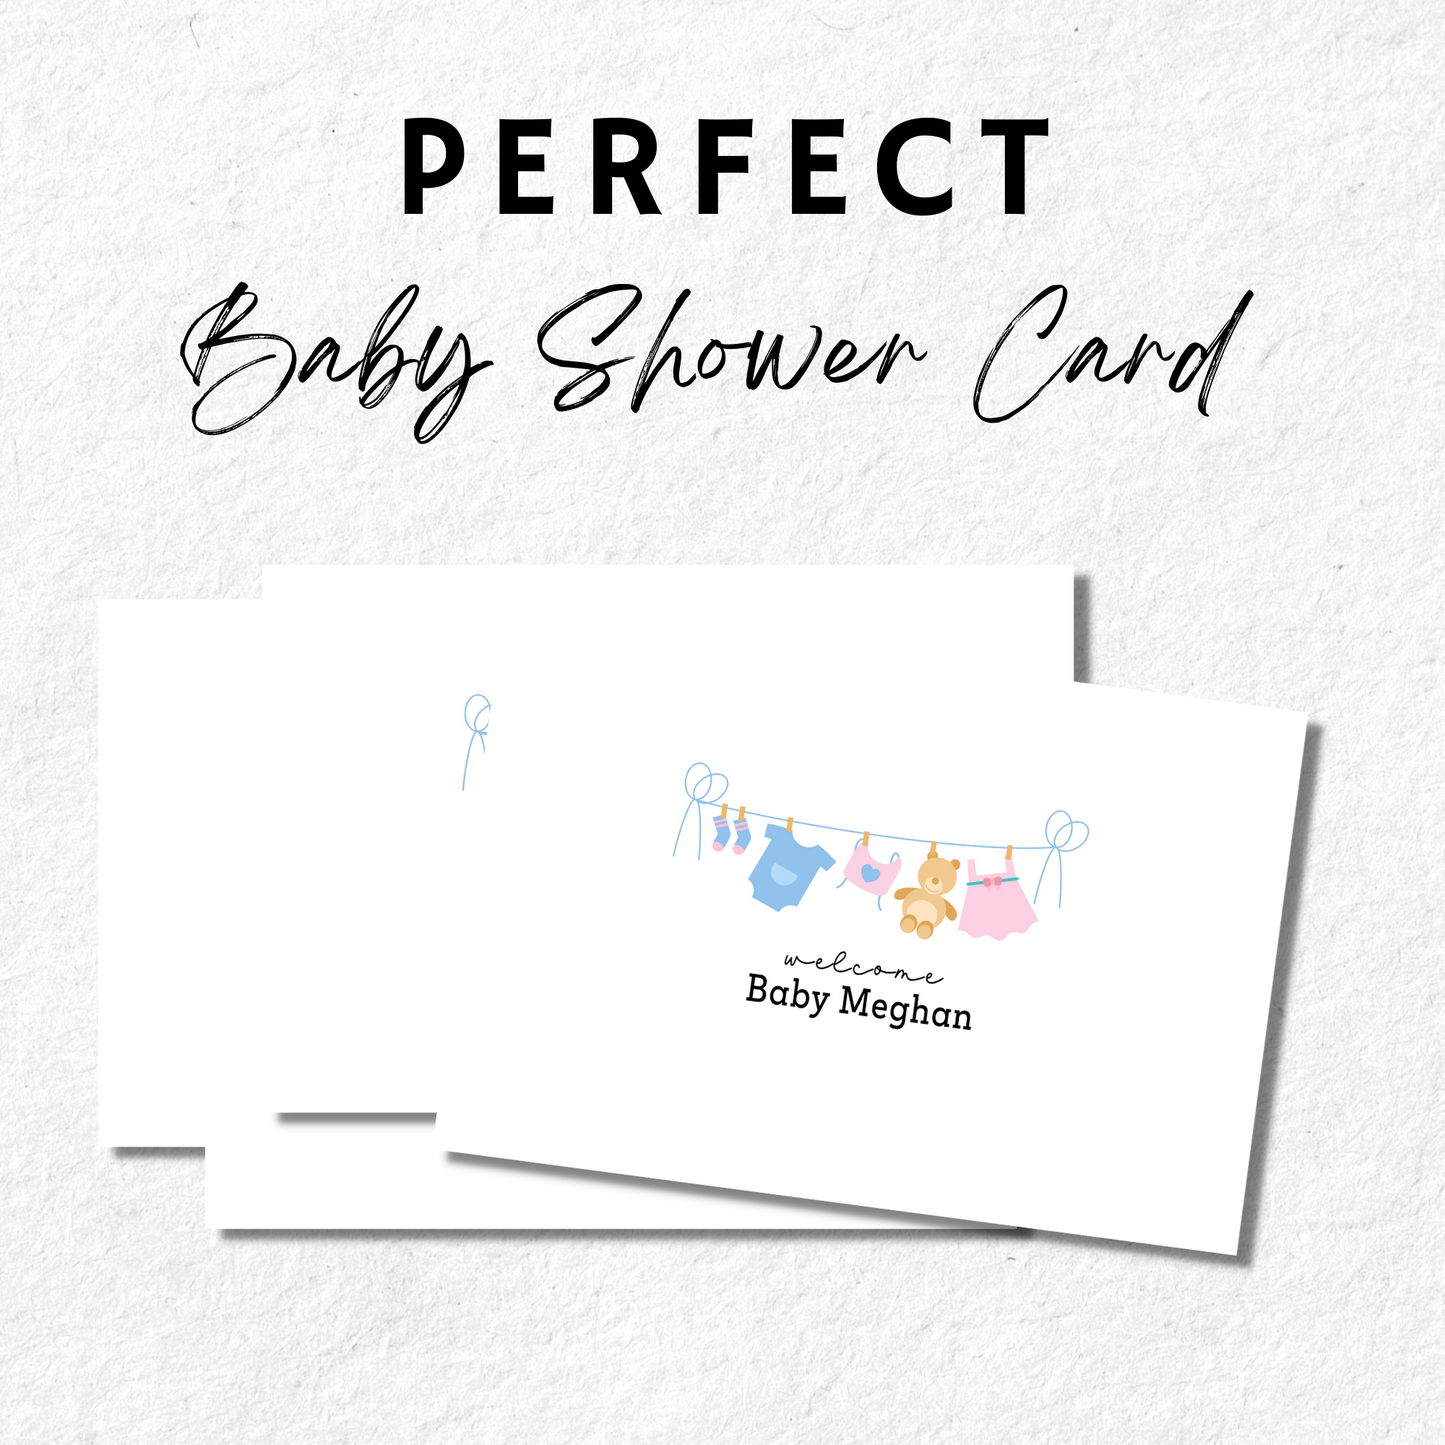 Baby Shower Greeting Card - Personalized